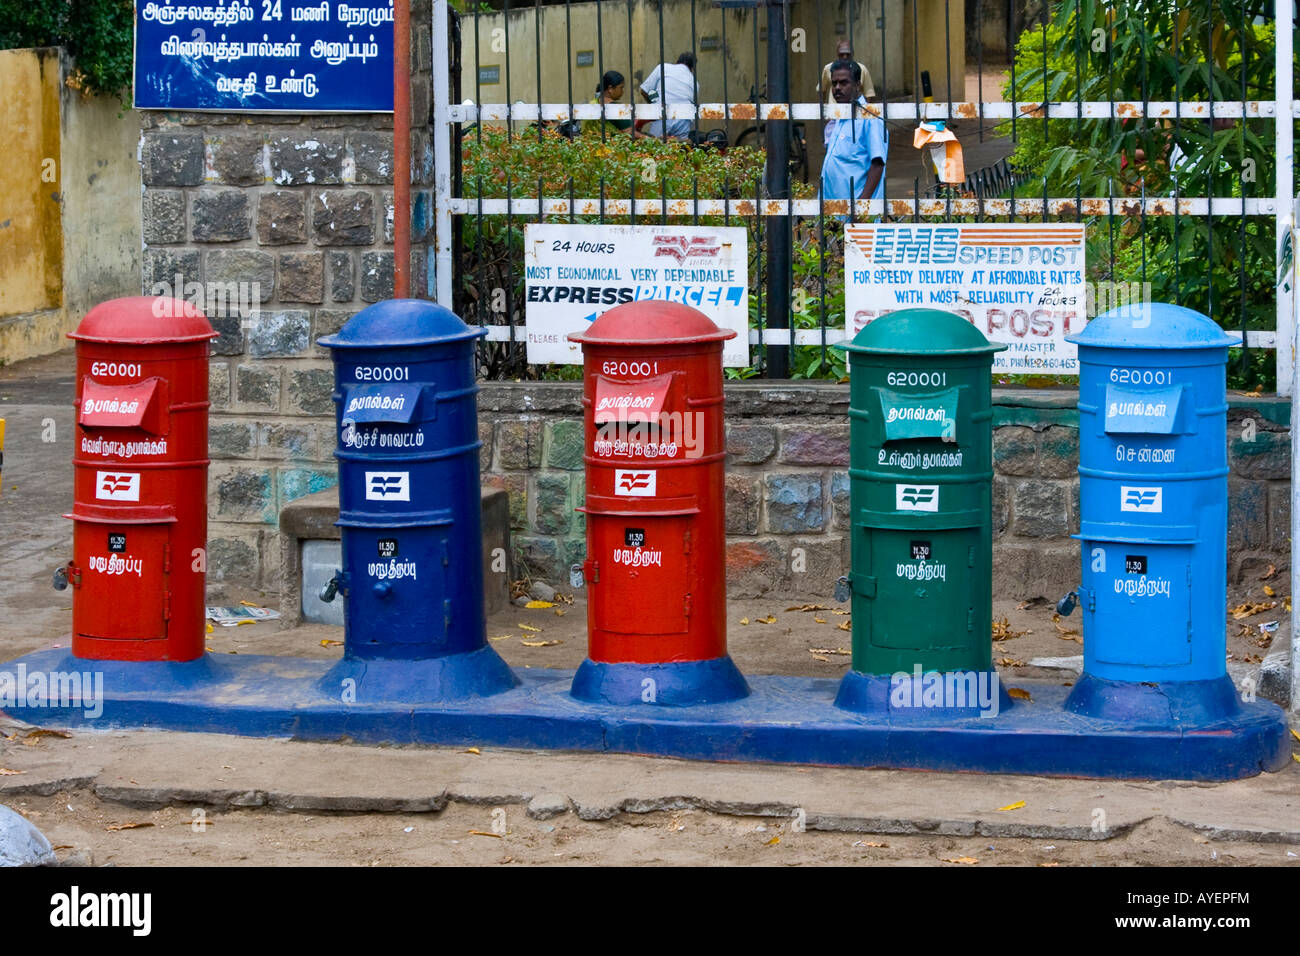 Colouful Mailboxes at India Post Office in Tiruchirappalli or Trichy India Stock Photo